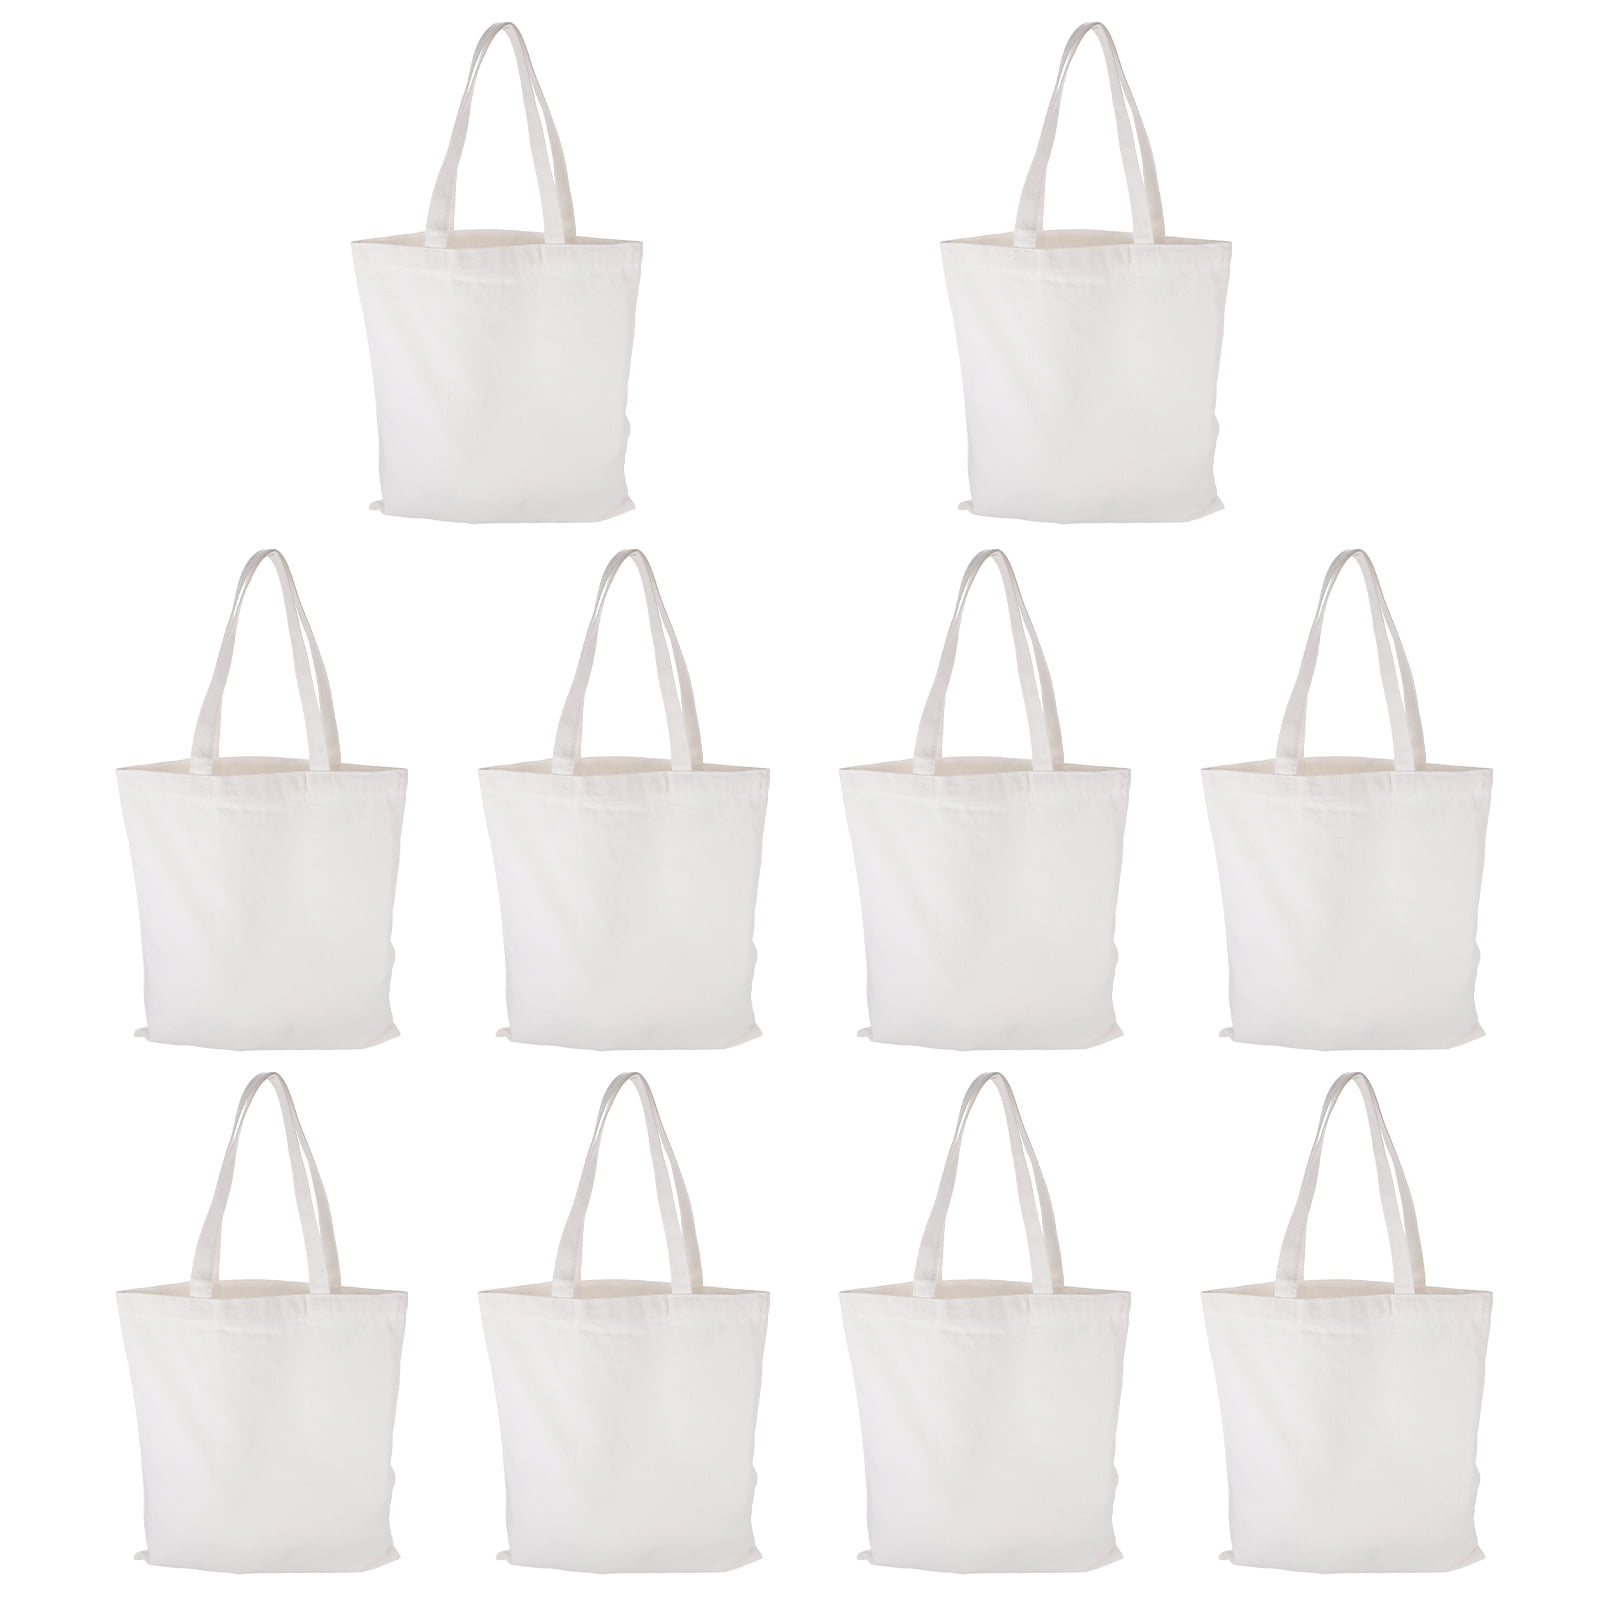 Full Circle Tote-Ally 4-Piece Grocery Market Set - Shopping Bag & 3 Mesh  Produce Bags - Gray 